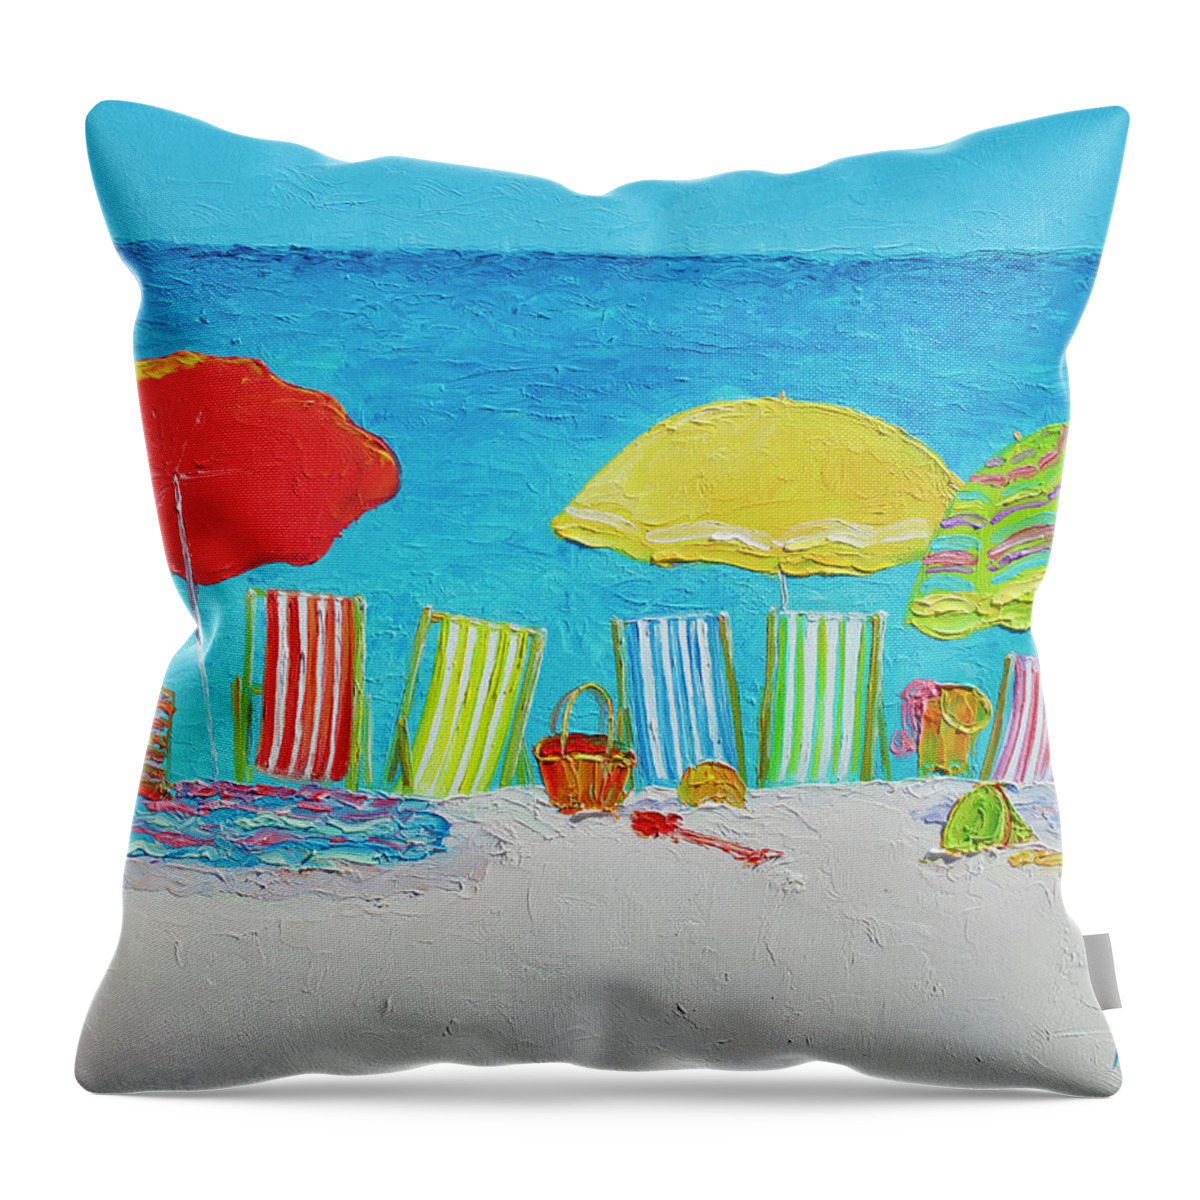 Beach Throw Pillow featuring the painting Beach Painting - Deck Chairs by Jan Matson